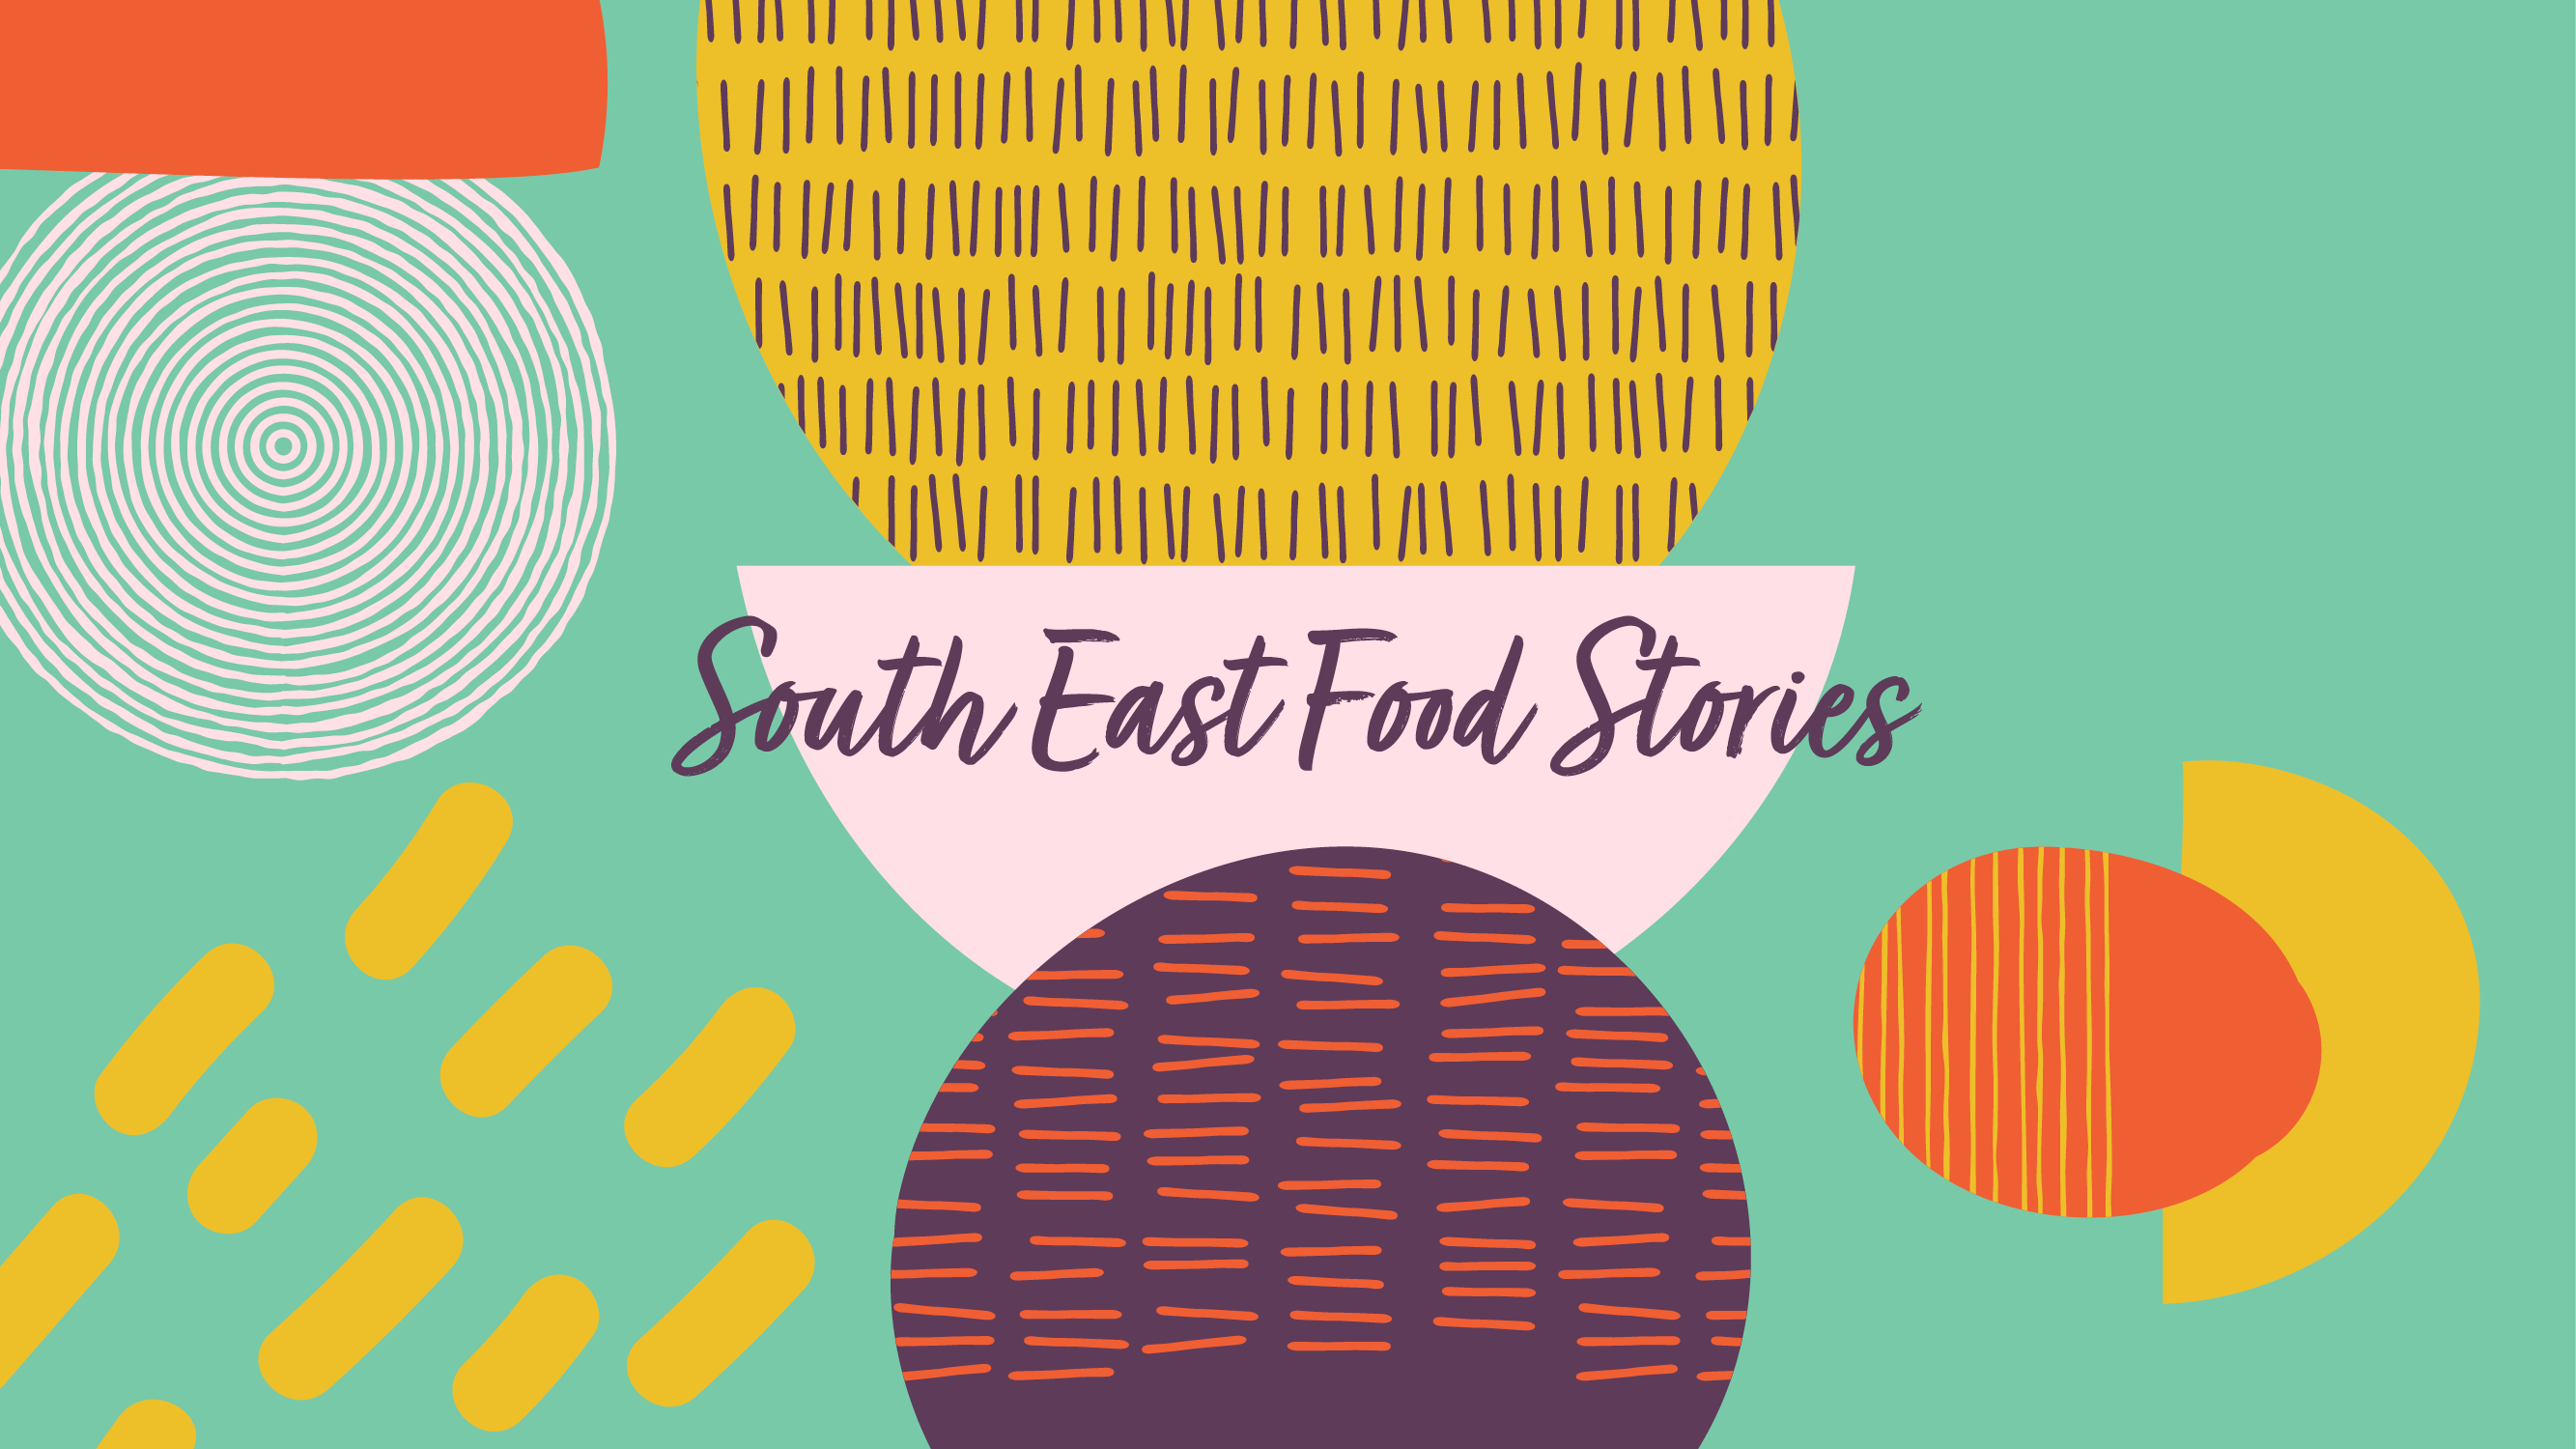 South East Food Stories